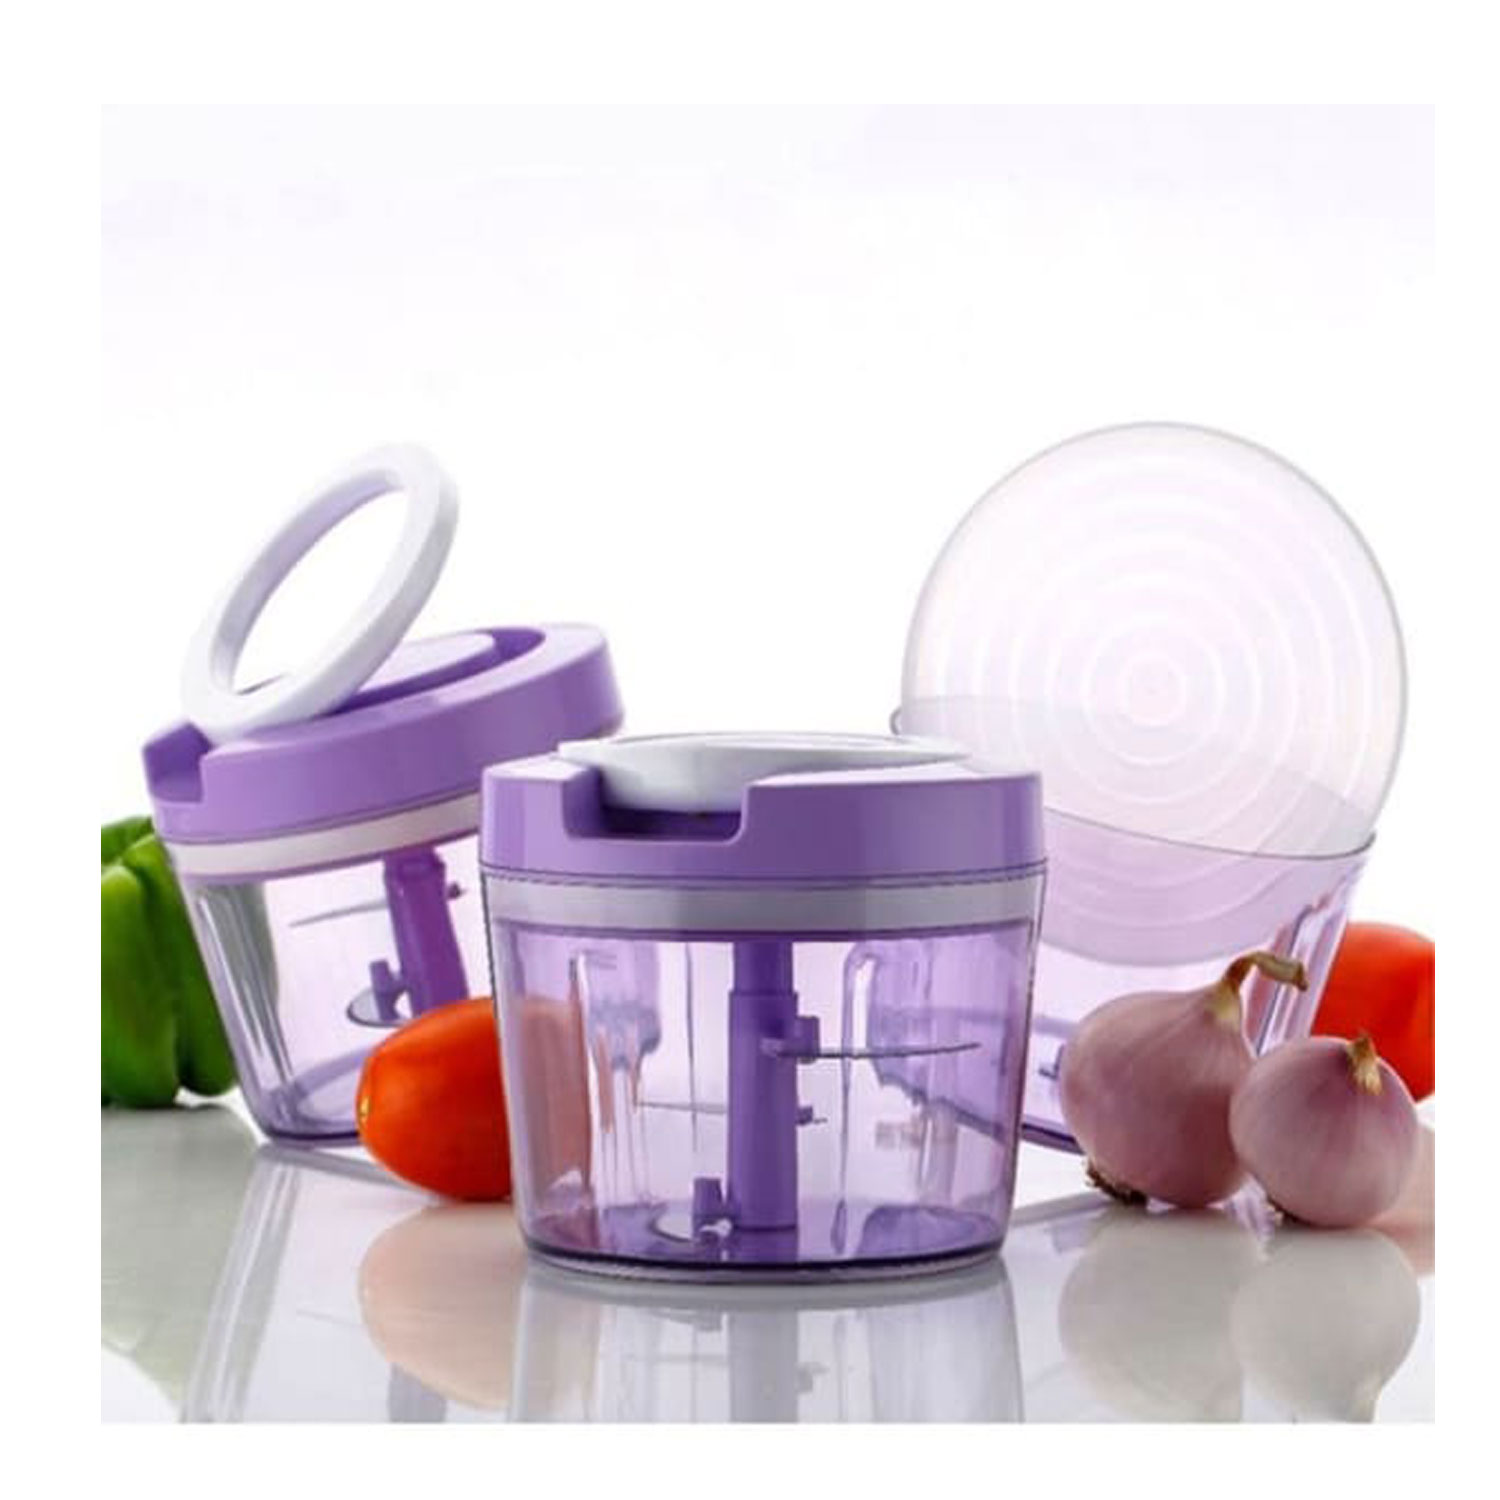 500ml Handy Plastic Chopper with Pull Cord Technology and 3 Stainless Steel Blades Eco Friendly Design Vegetable and Fruit Choppers (Multicolor)